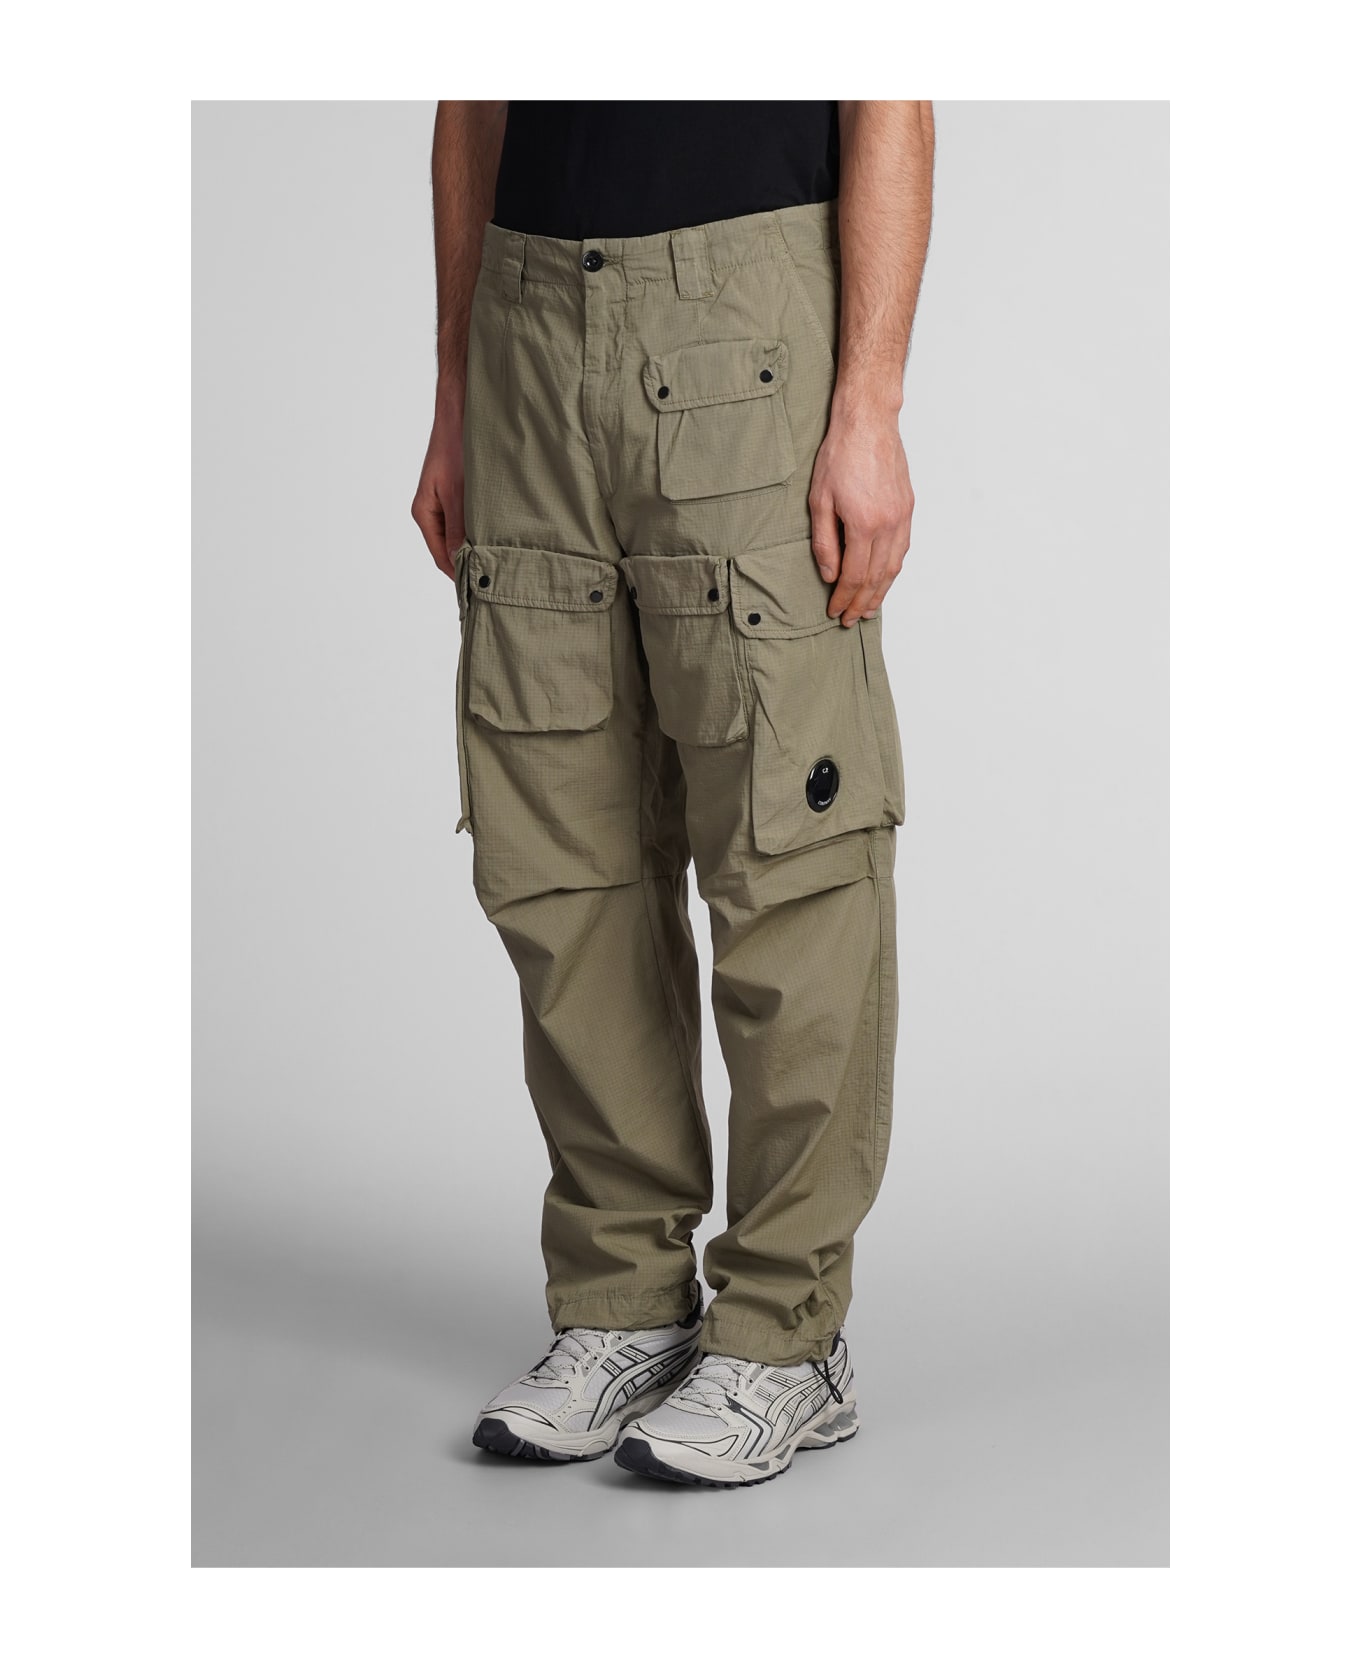 C.P. Company Rip Stop Pants In Green Cotton - Agave Green